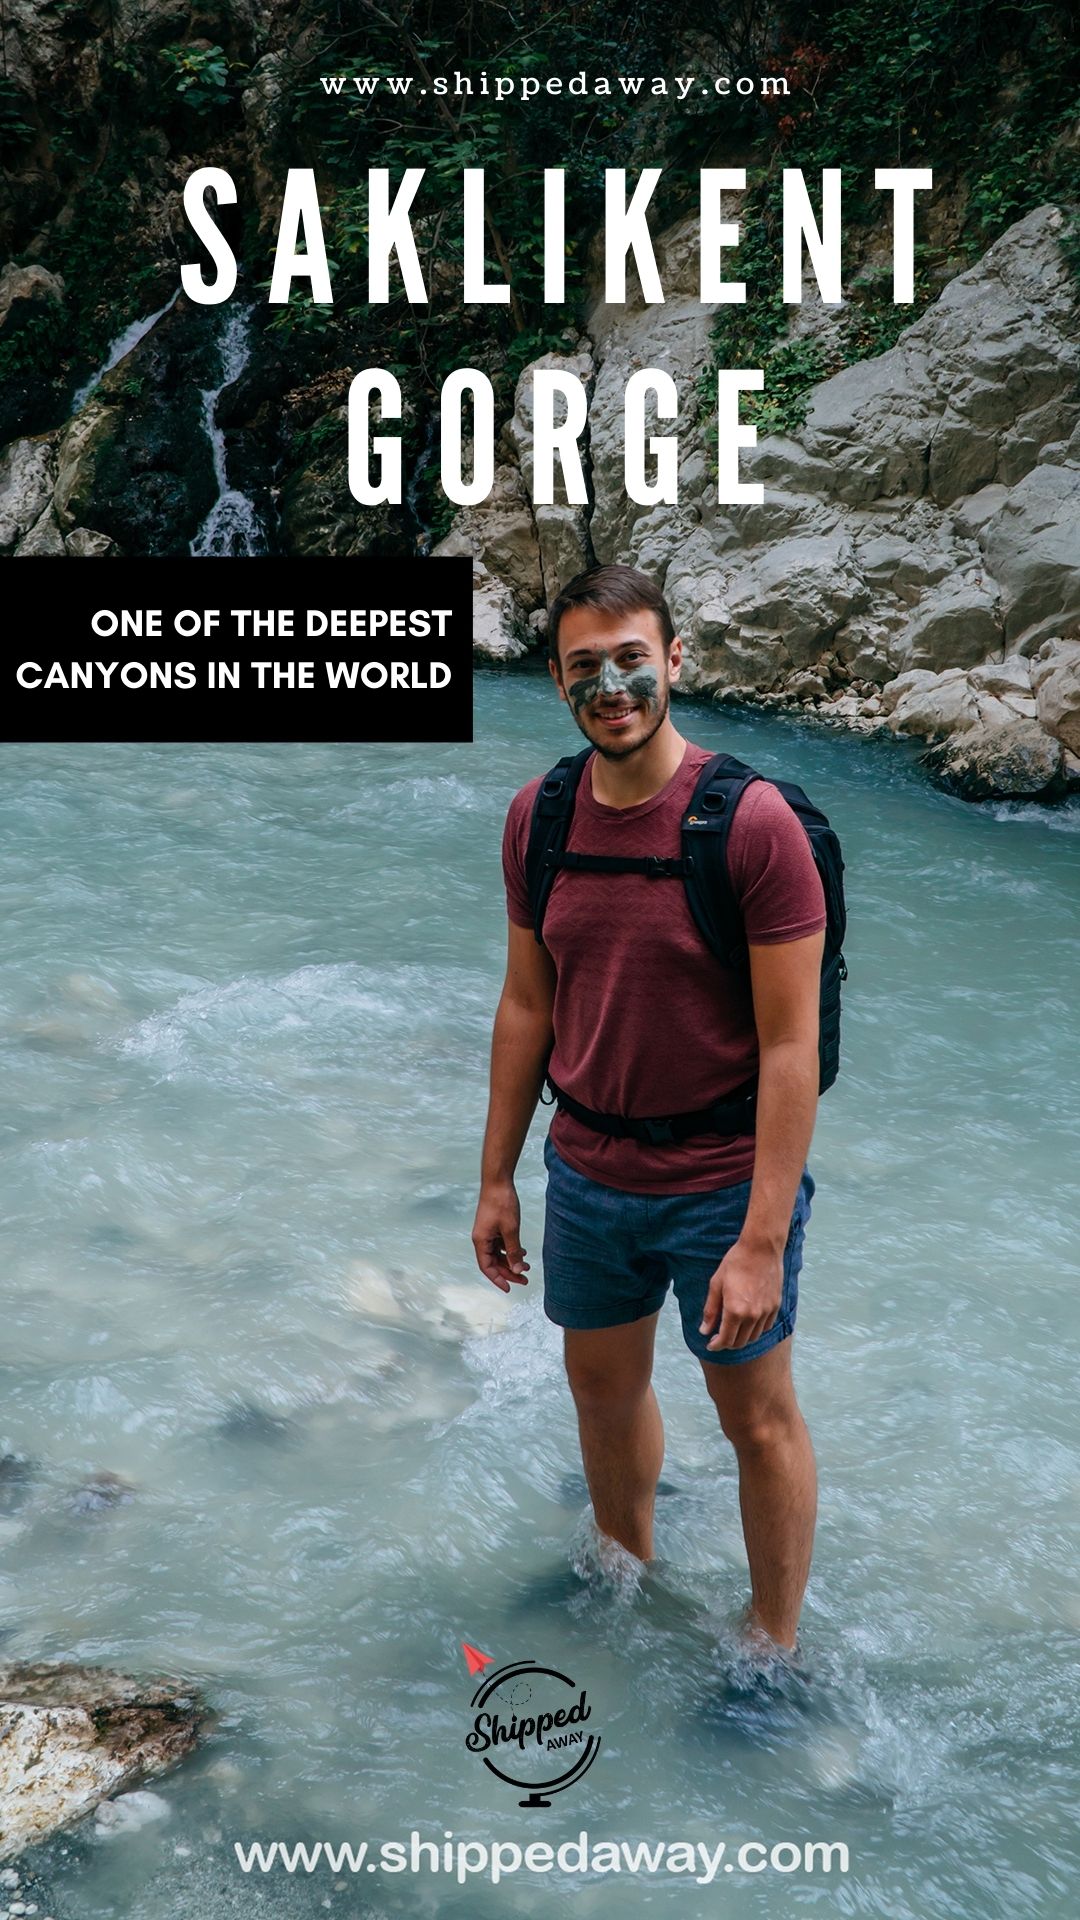 Saklikent Gorge - One of the deepest canyons in the world